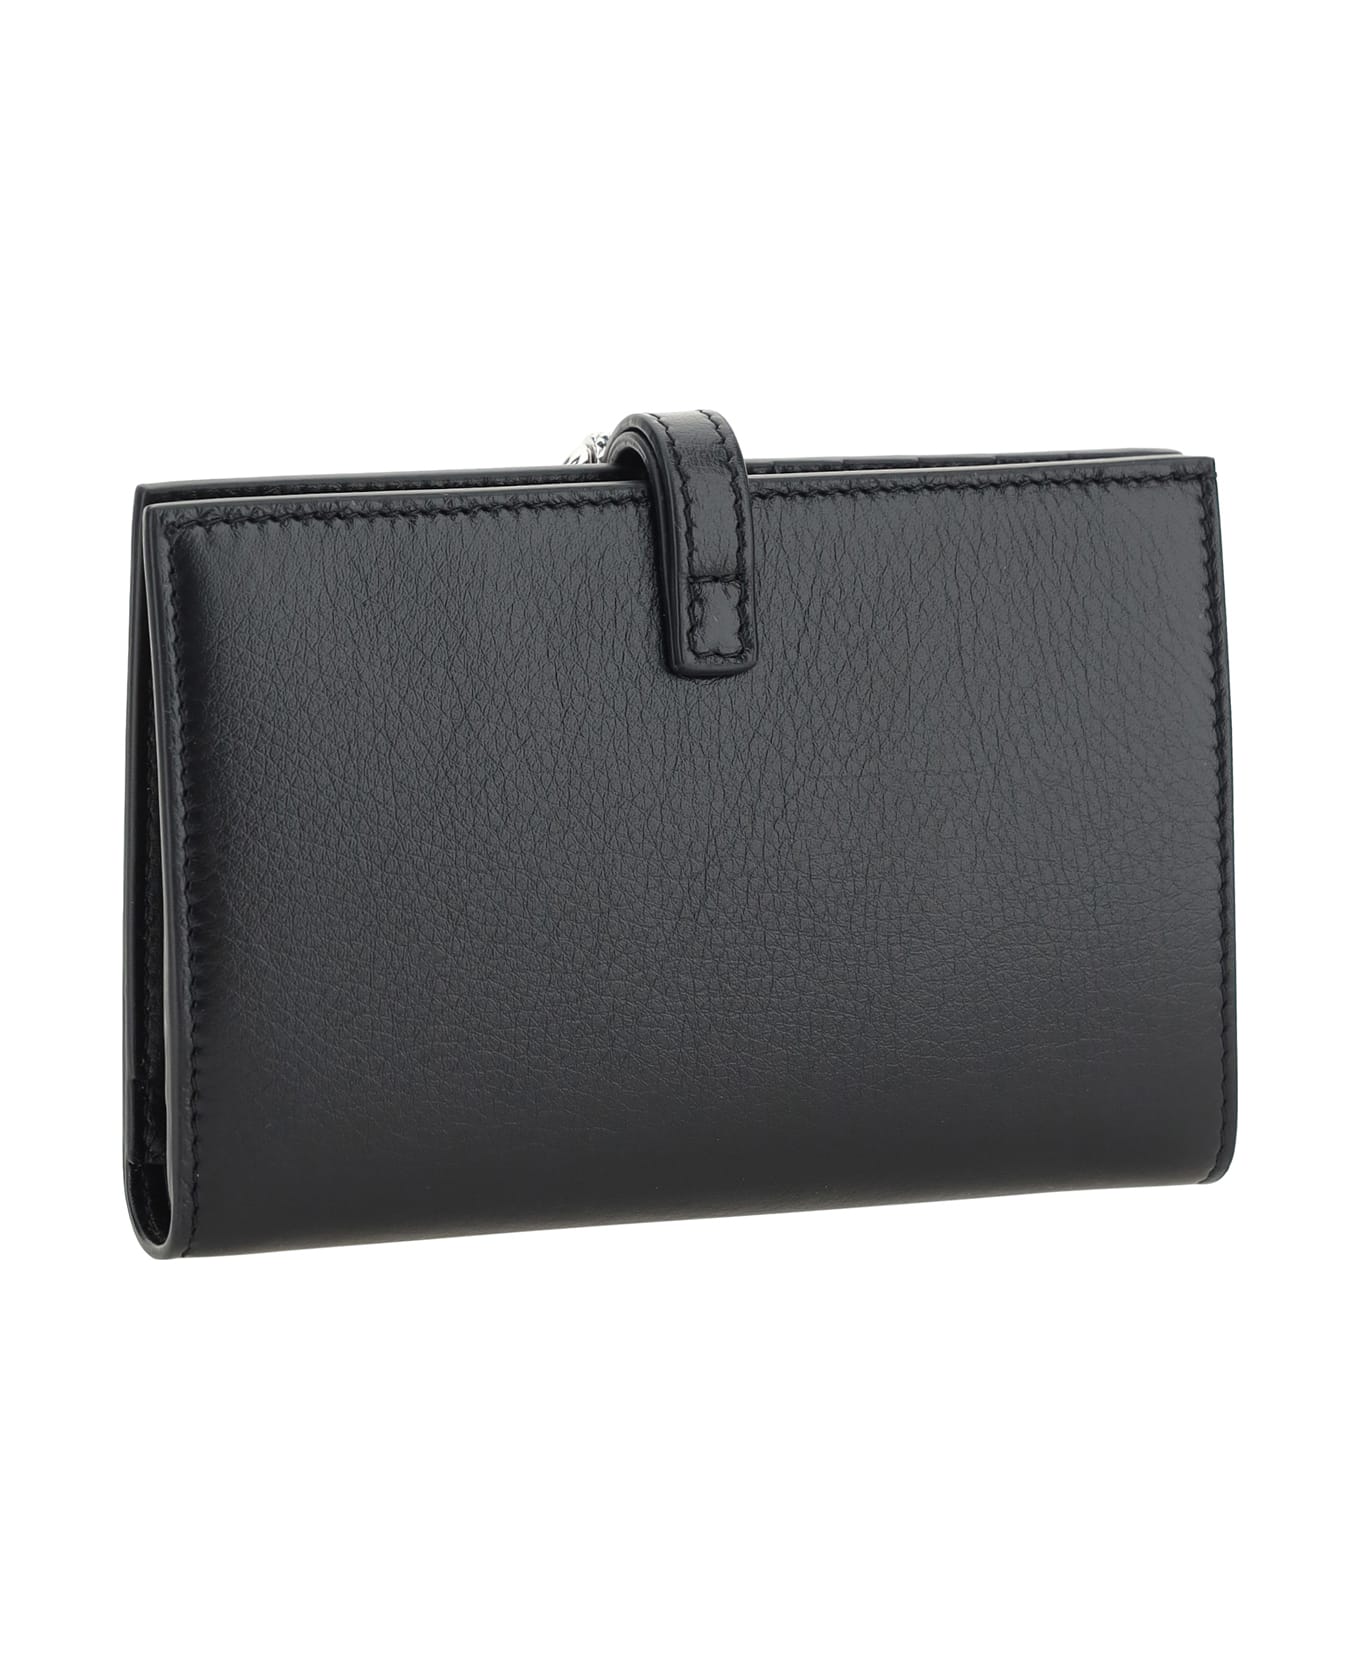 Givenchy Voyou Leather Wallet - Black